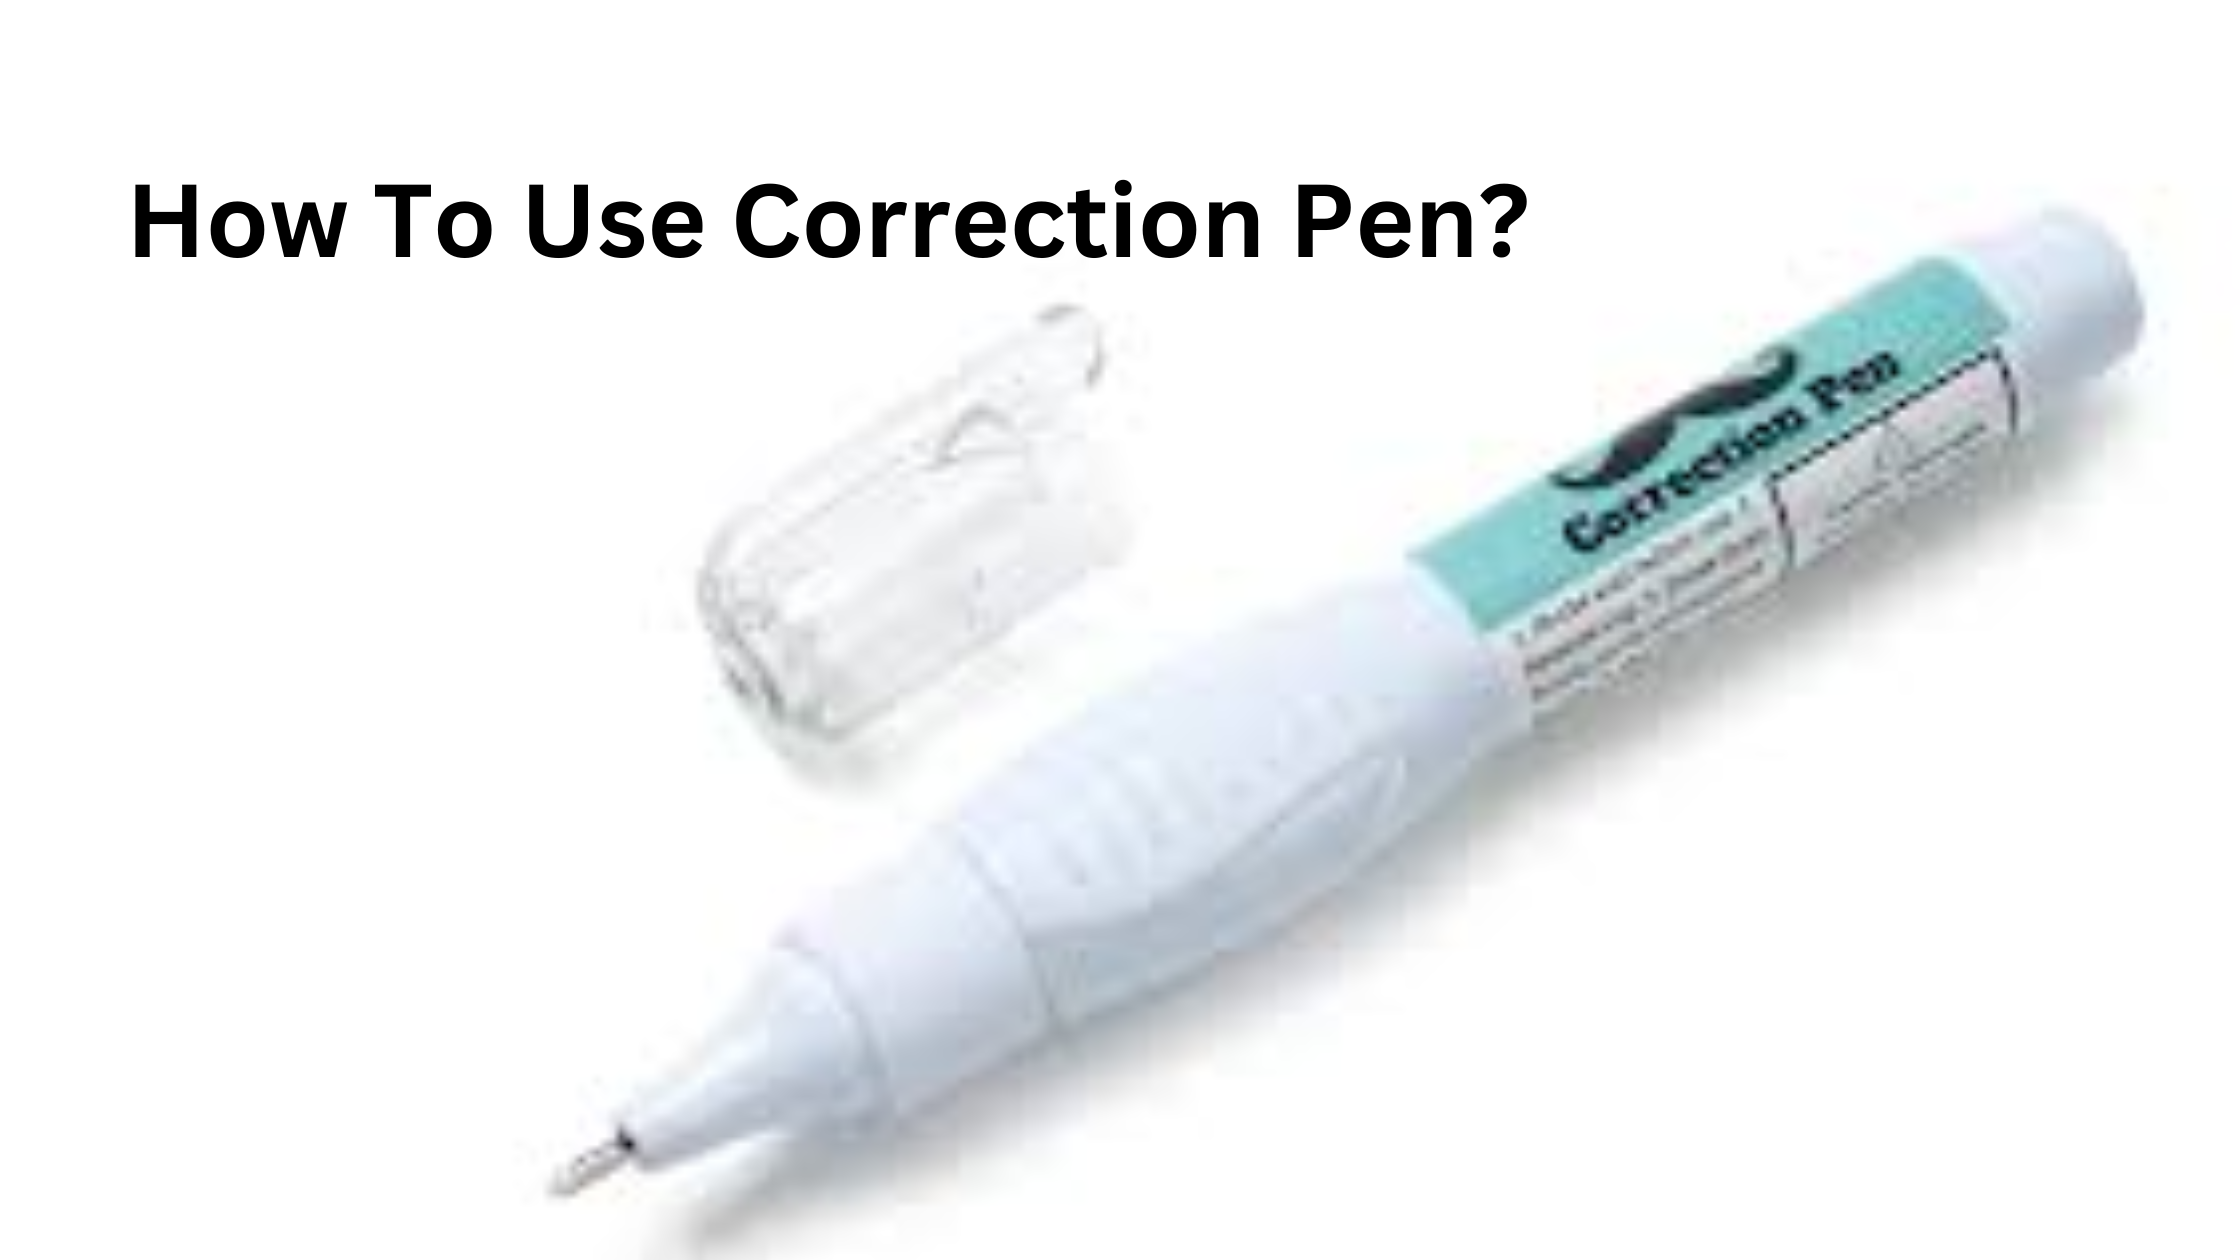 How To Use Correction Pen?